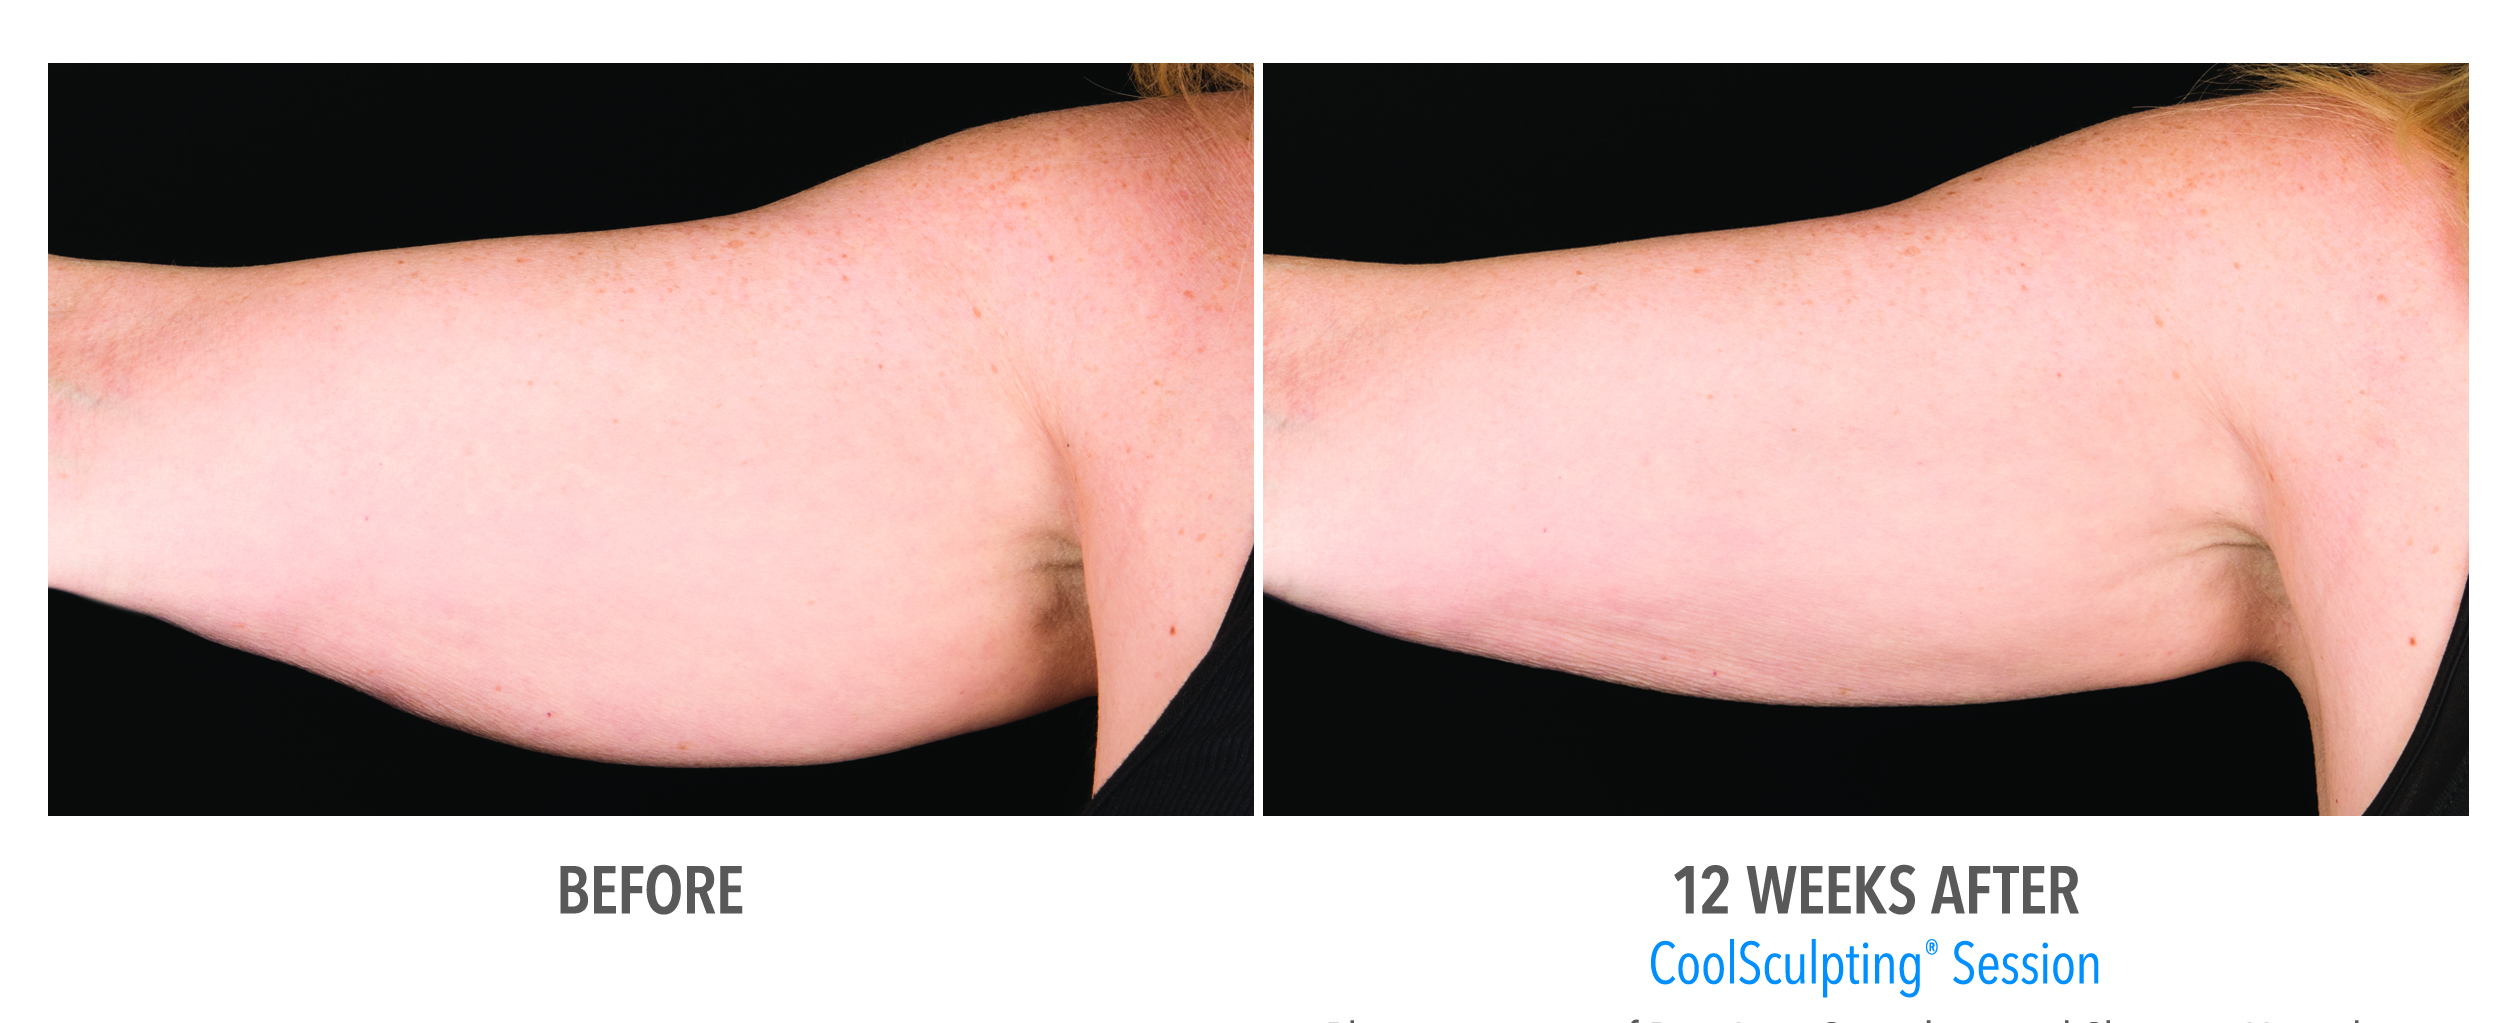 Flabby, Saggin Arms - Why Is It Hard to Lose Fat in Your Upper Arms? -  Atlanta Liposuction Specialty Clinic